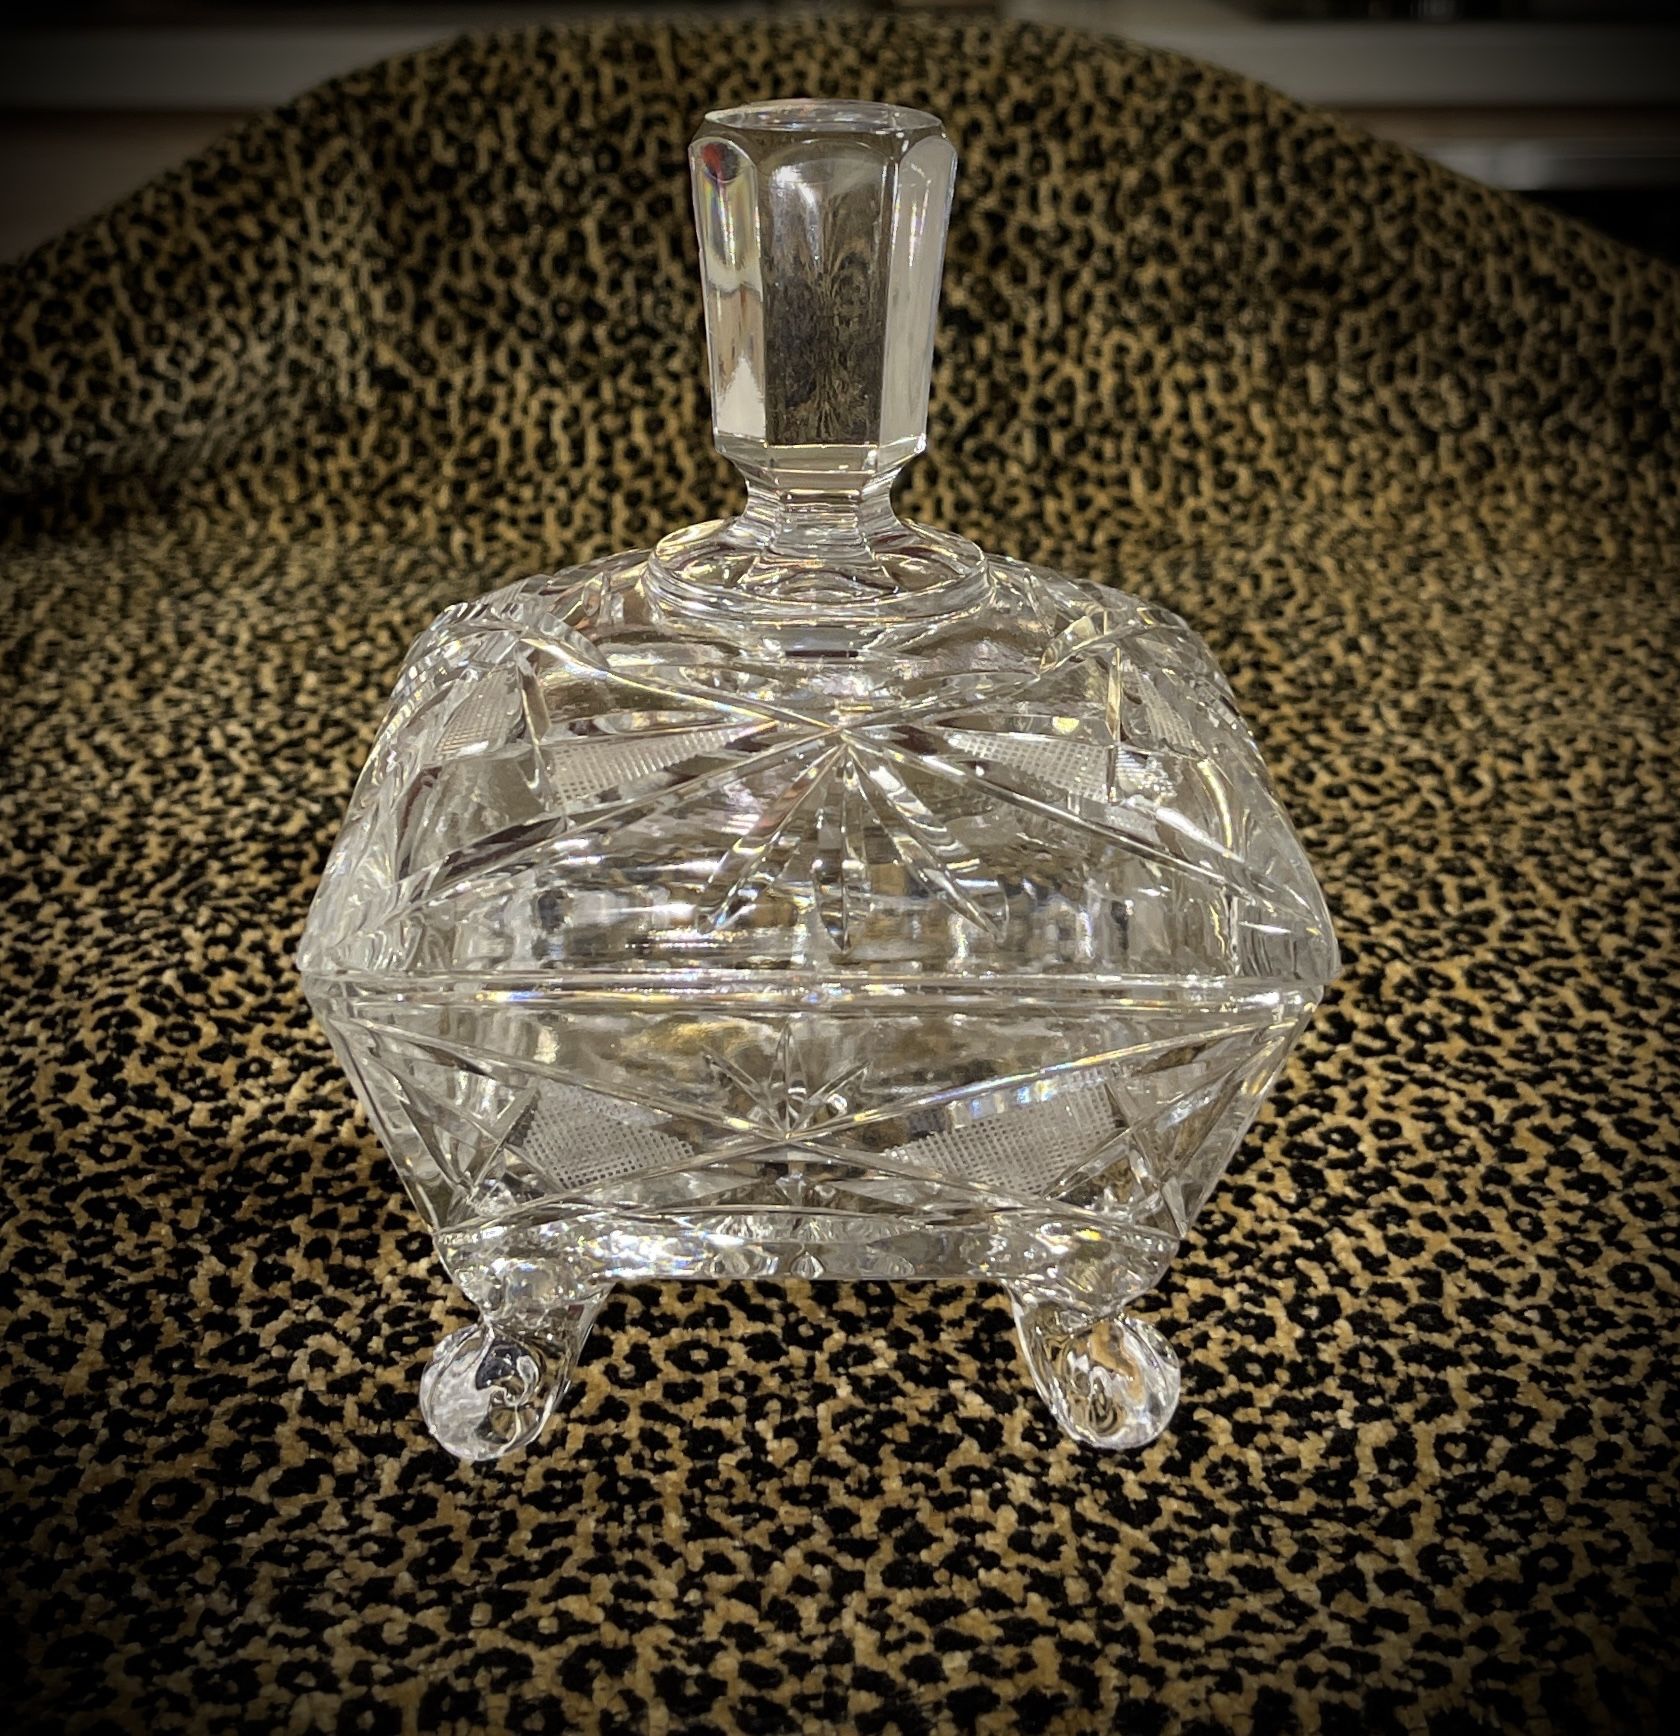 Cut Lead Crystal Candy or Trinket Dish with Lid